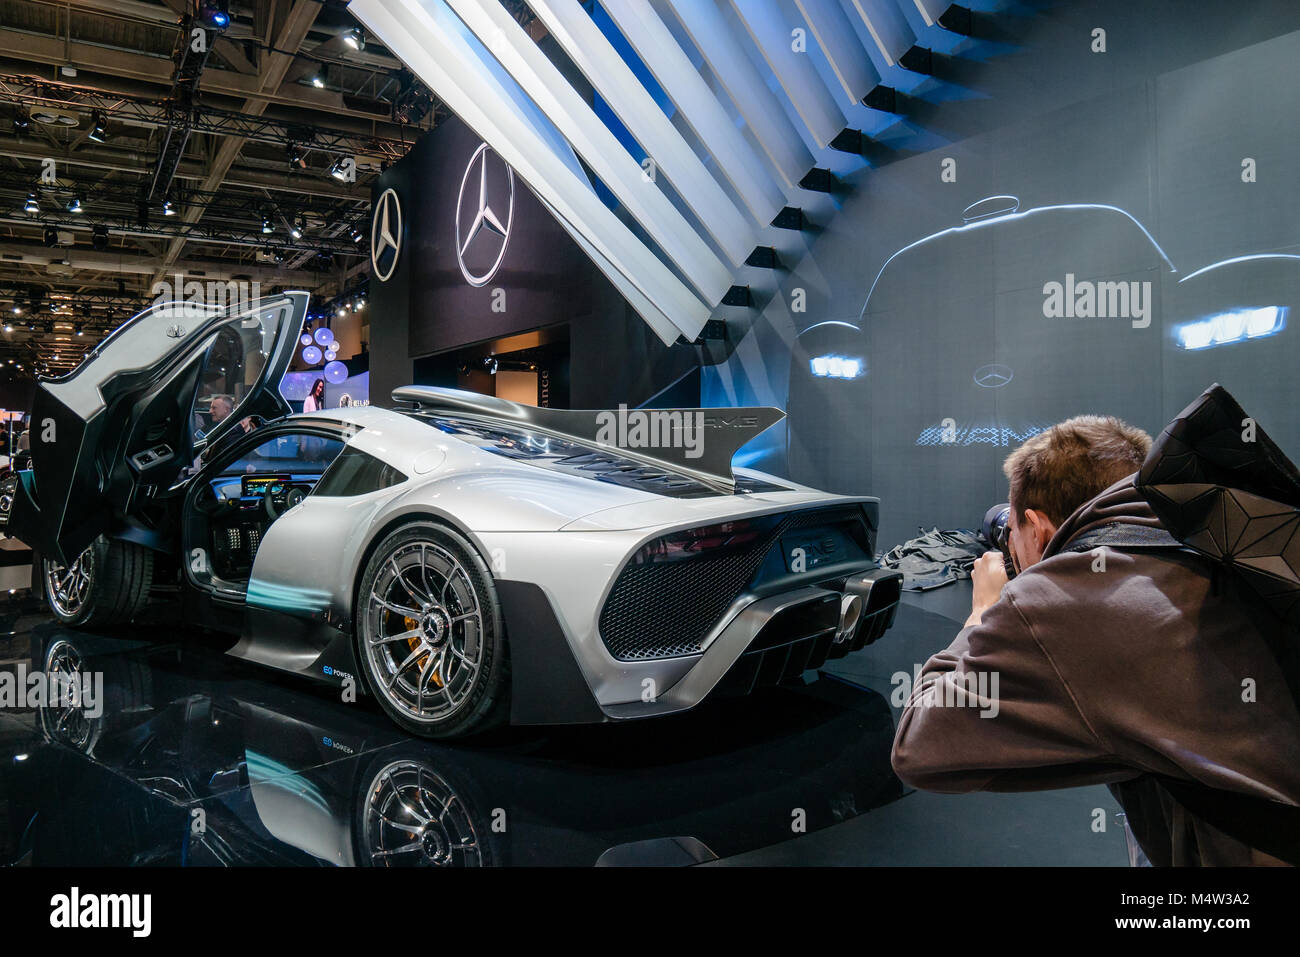 mercedes benz project one concept canadian international auto show Stock Photo